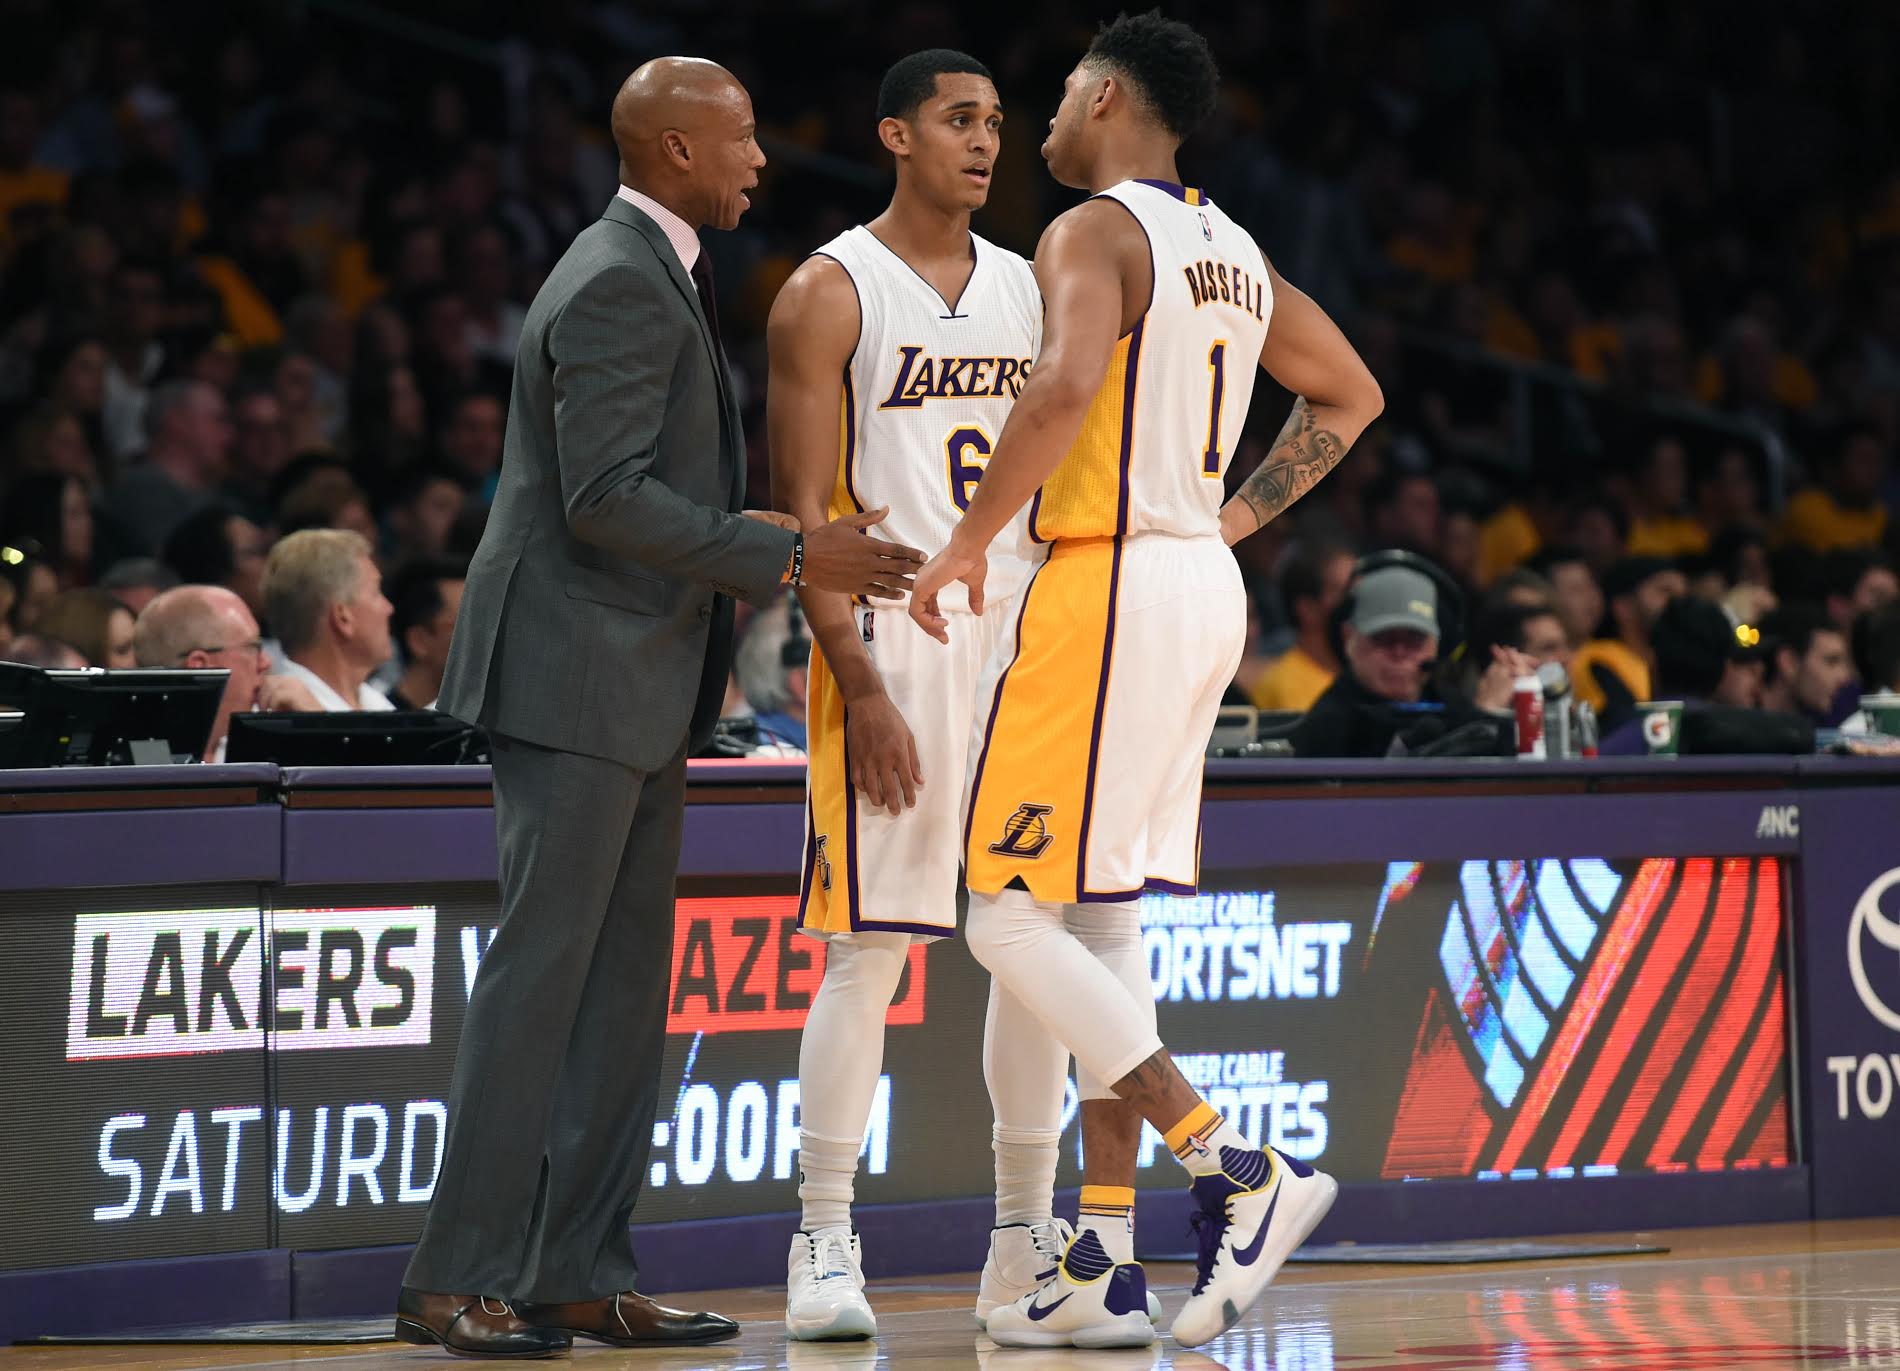 Los Angeles Lakers head coach Byron Scott  talks with Laker Jordan Clarkson,6, and D'Angelo Russell ,1, against Portland, during the second half at the Staples Center.  Los Angeles Calif., Sunday, November,22, 2015.         (Photo by Stephen Carr / Daily Breeze)